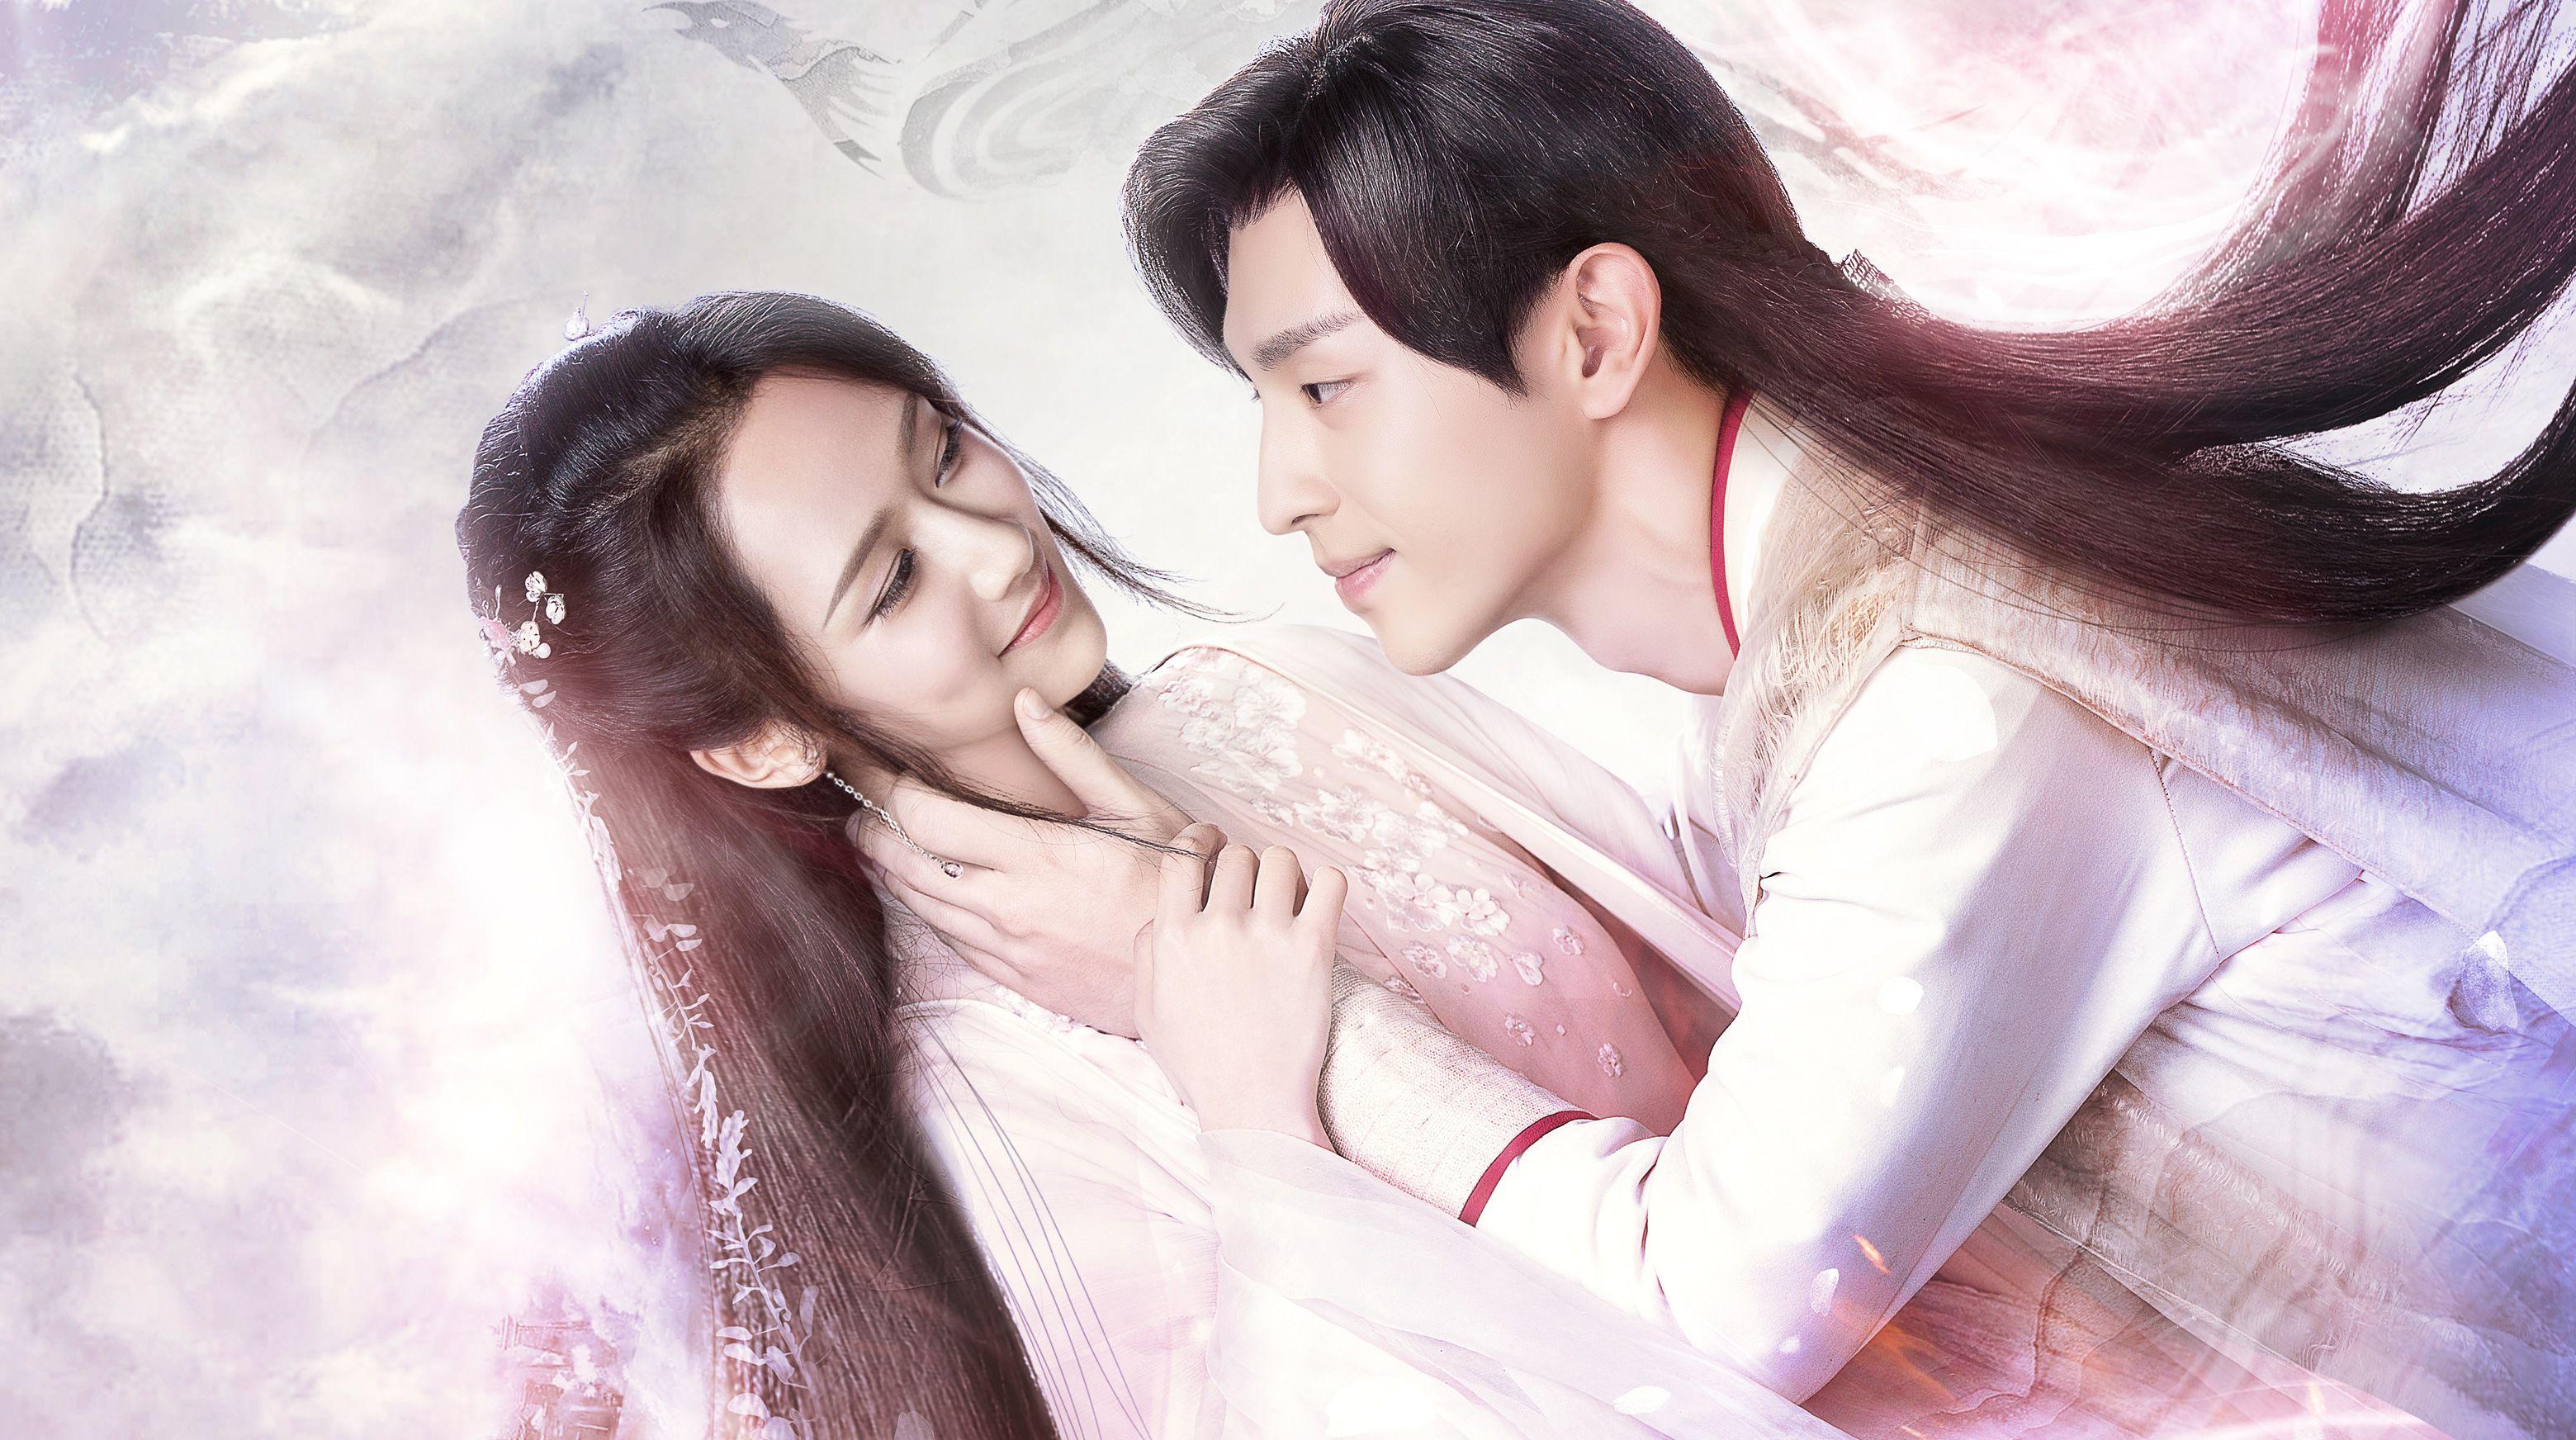 Behind the Scenes 9: Deng Lun Special: Ashes of Love - 香蜜